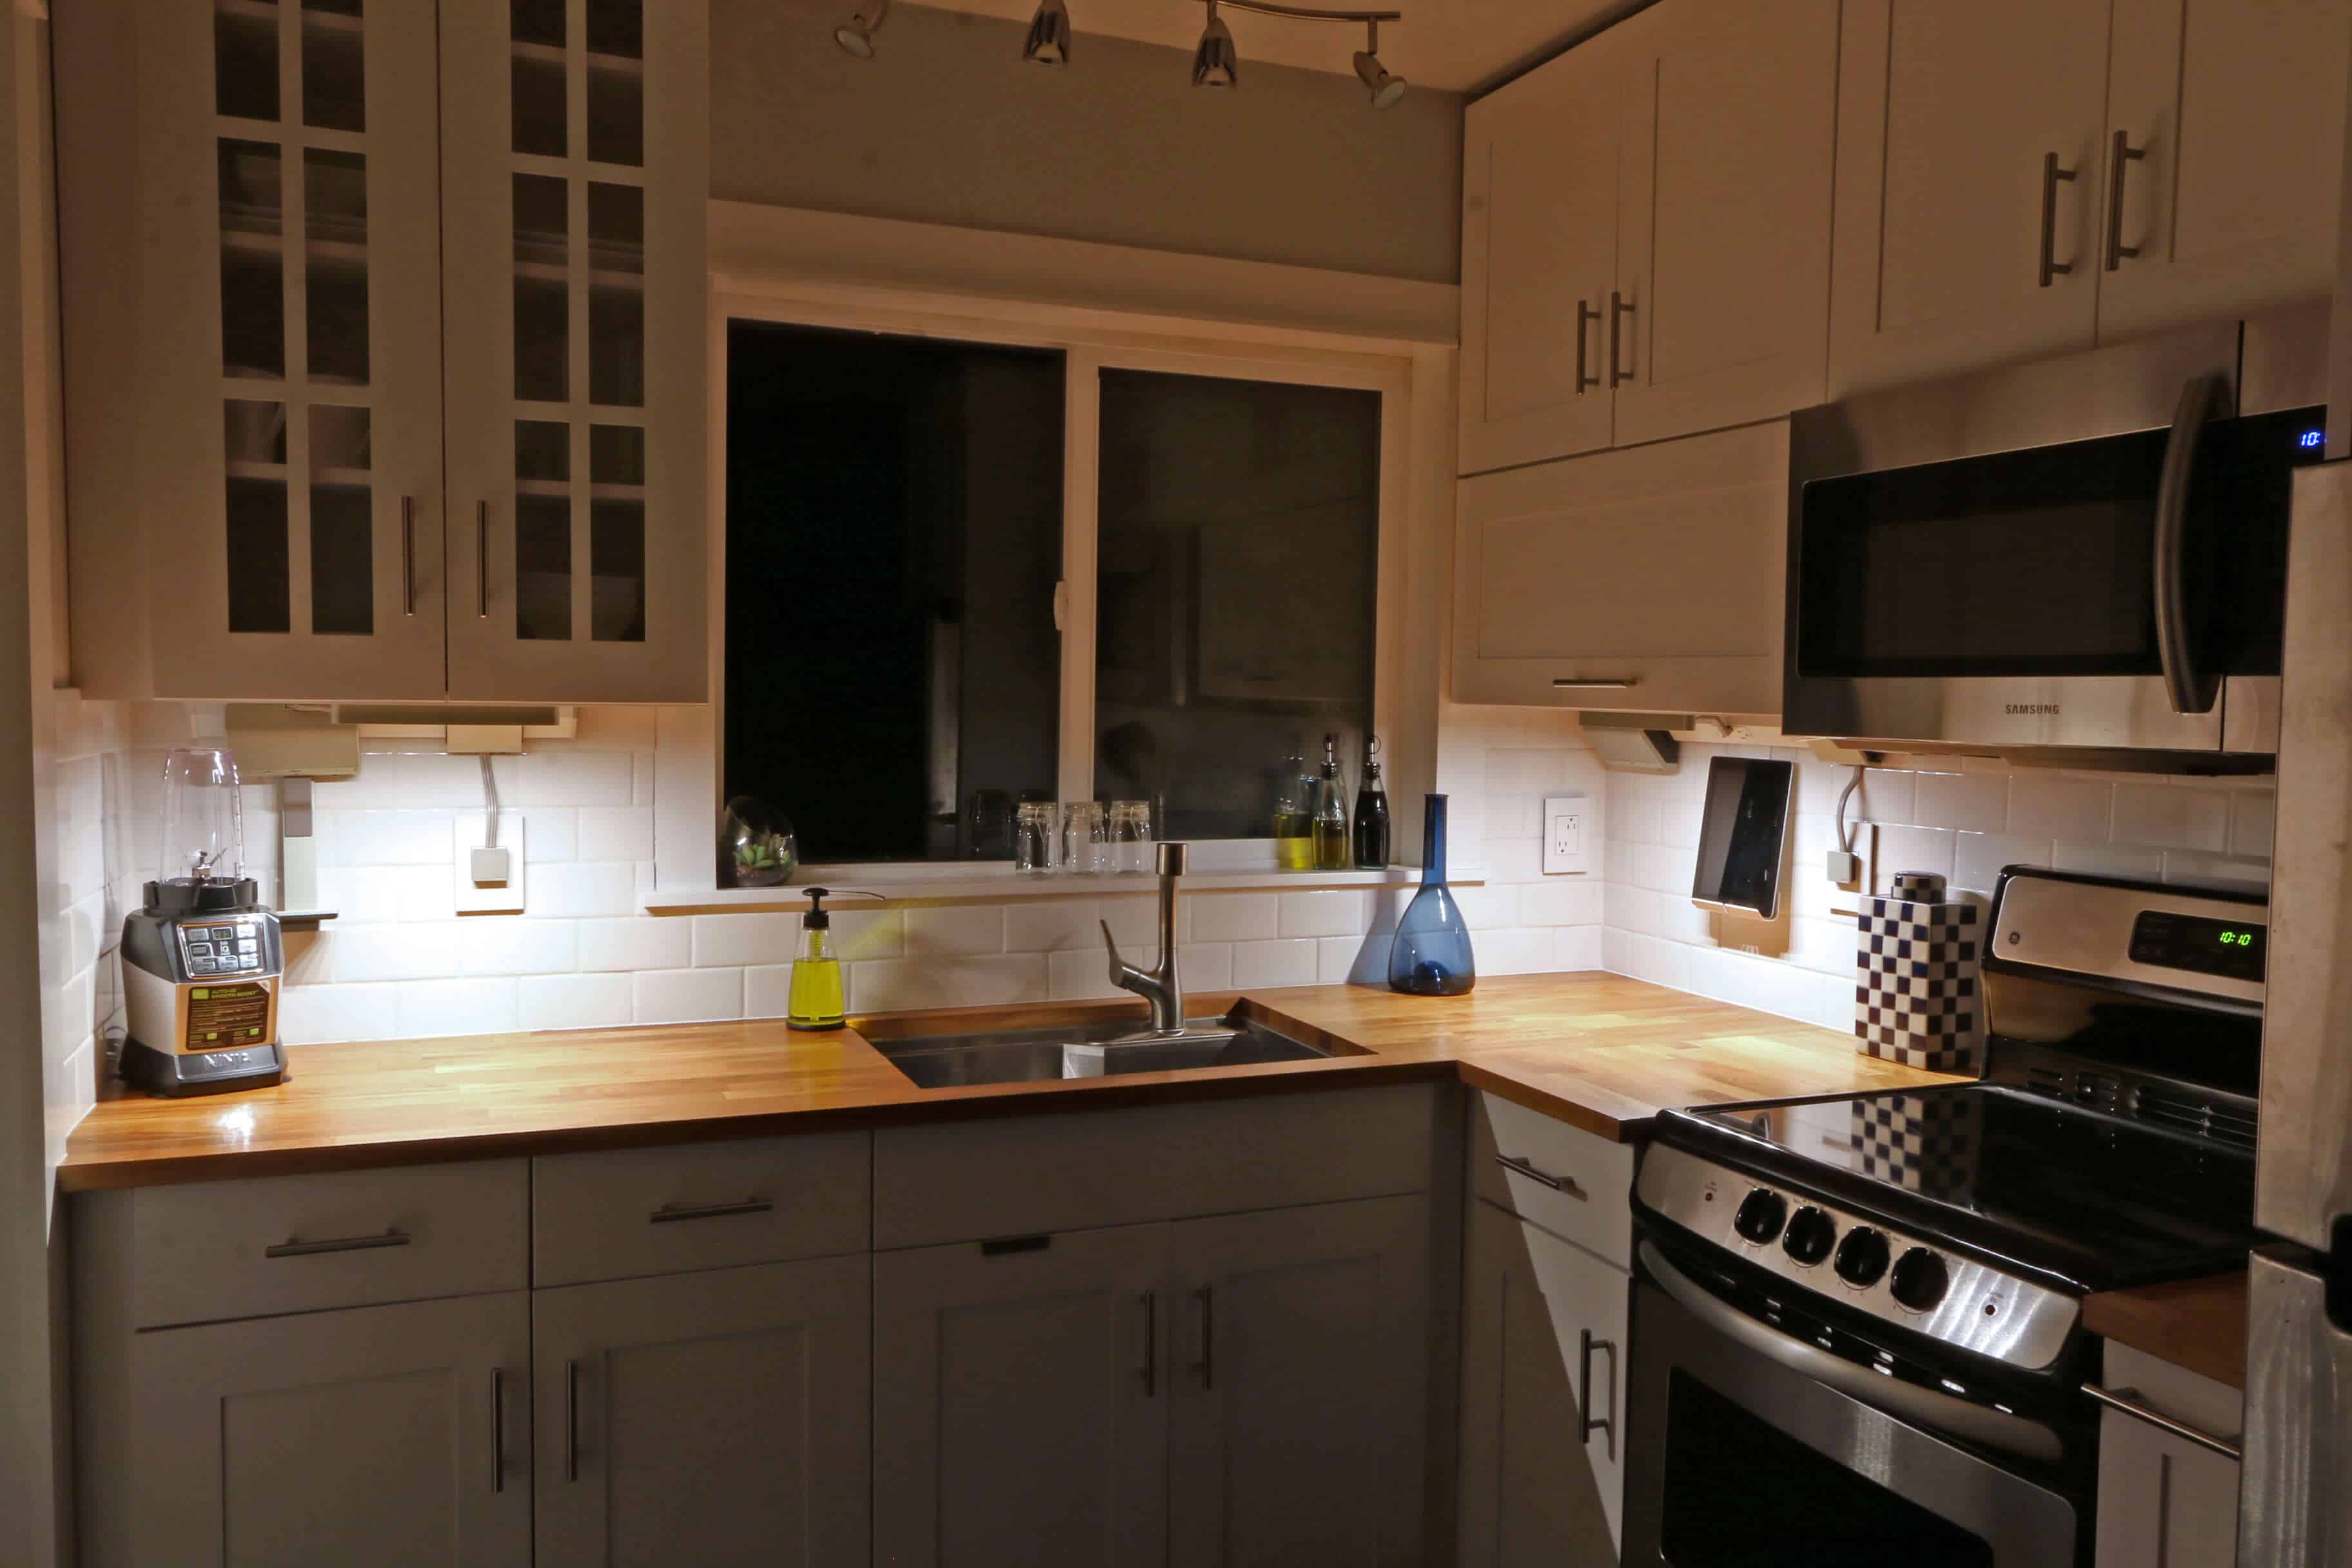 legrand adorne collection review outlets switches under cabinet lighting digital music kit